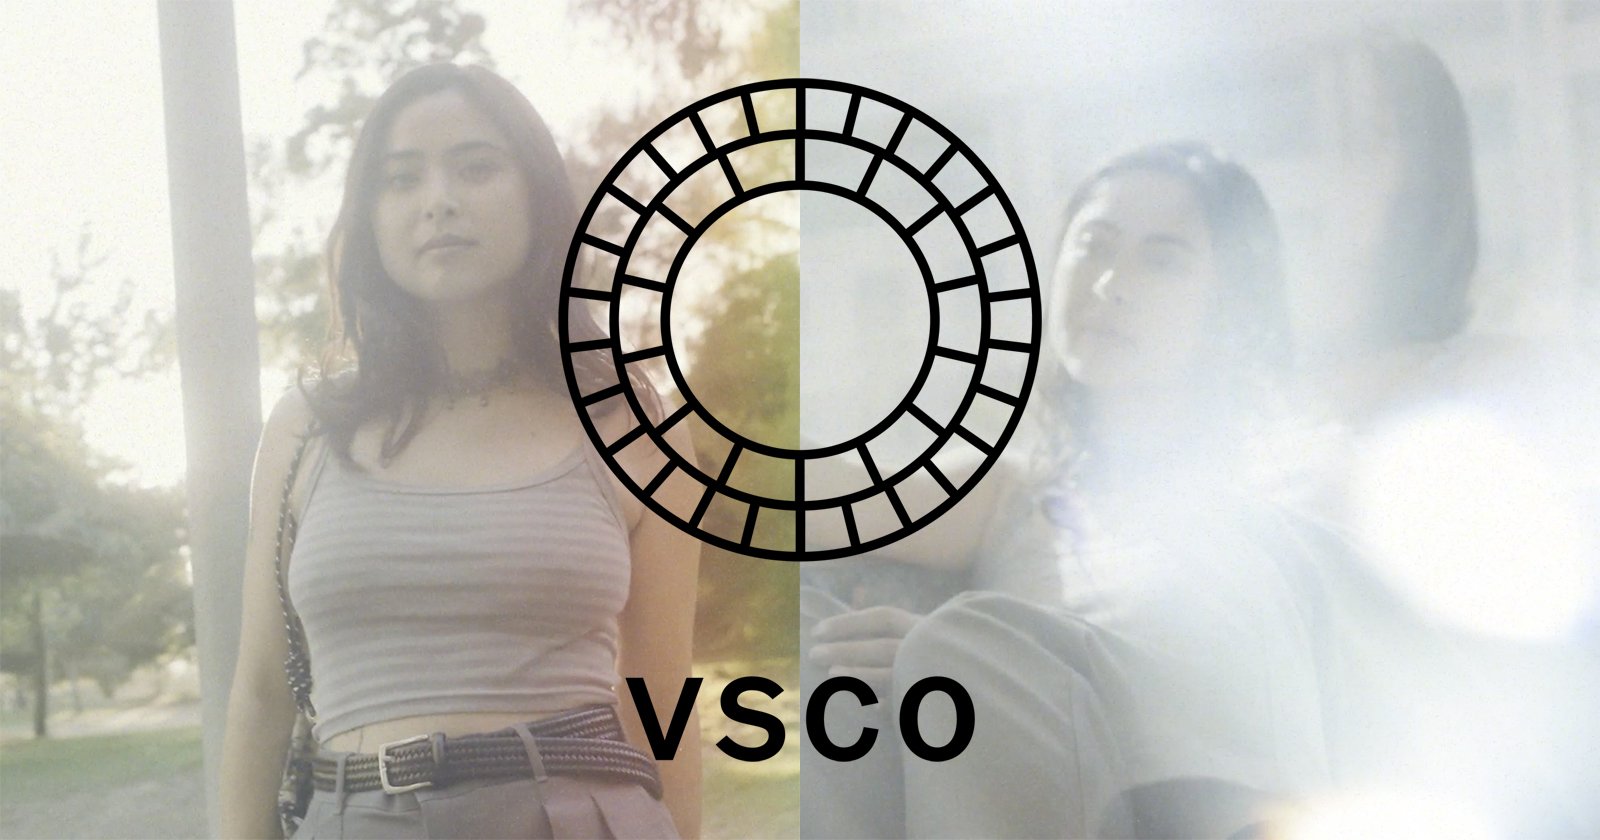 VSCO Brings Film-Inspired Effects to Snapchat with New Analog Lens